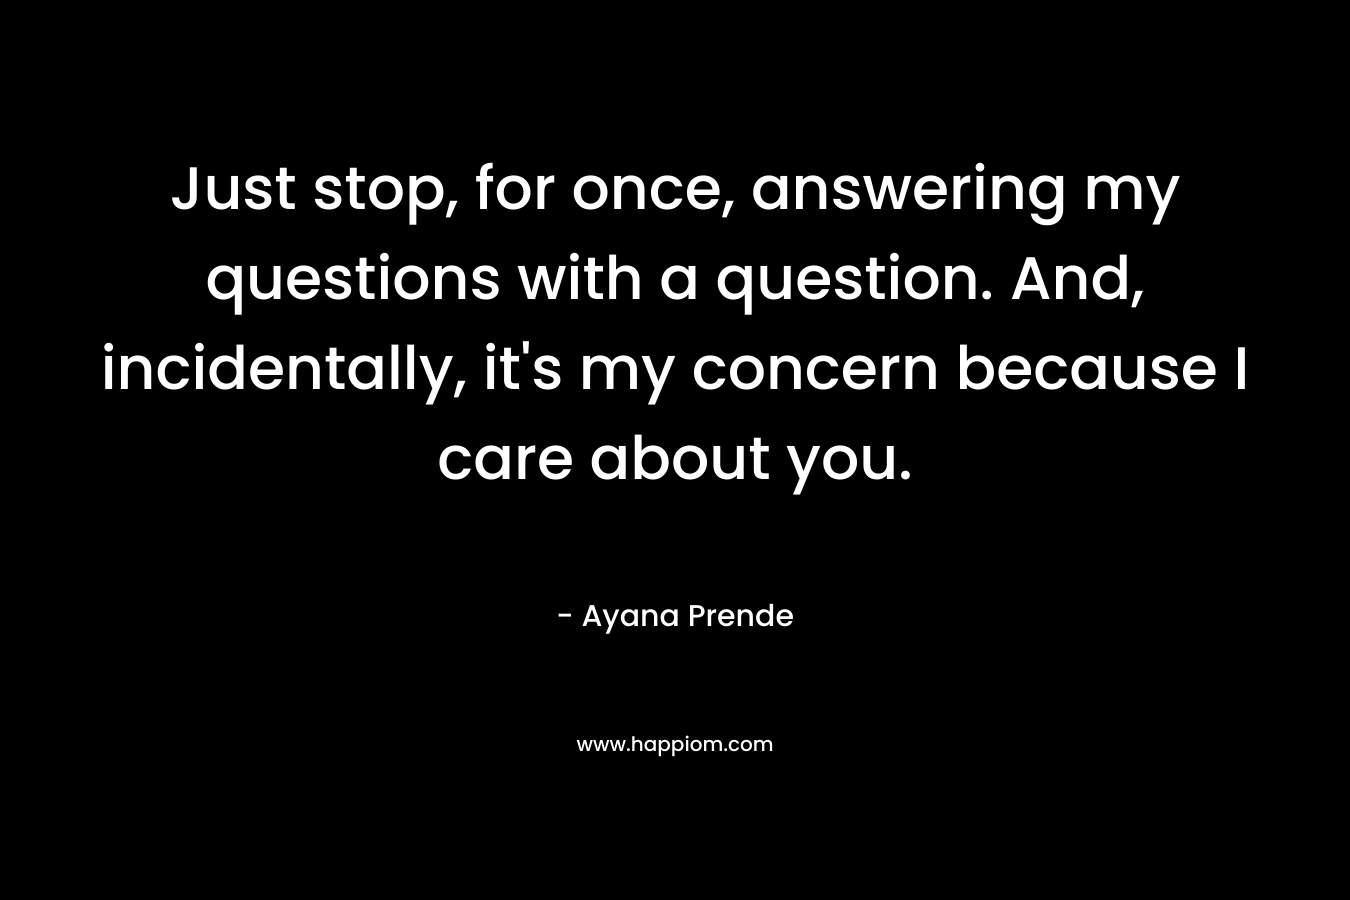 Just stop, for once, answering my questions with a question. And, incidentally, it’s my concern because I care about you. – Ayana Prende